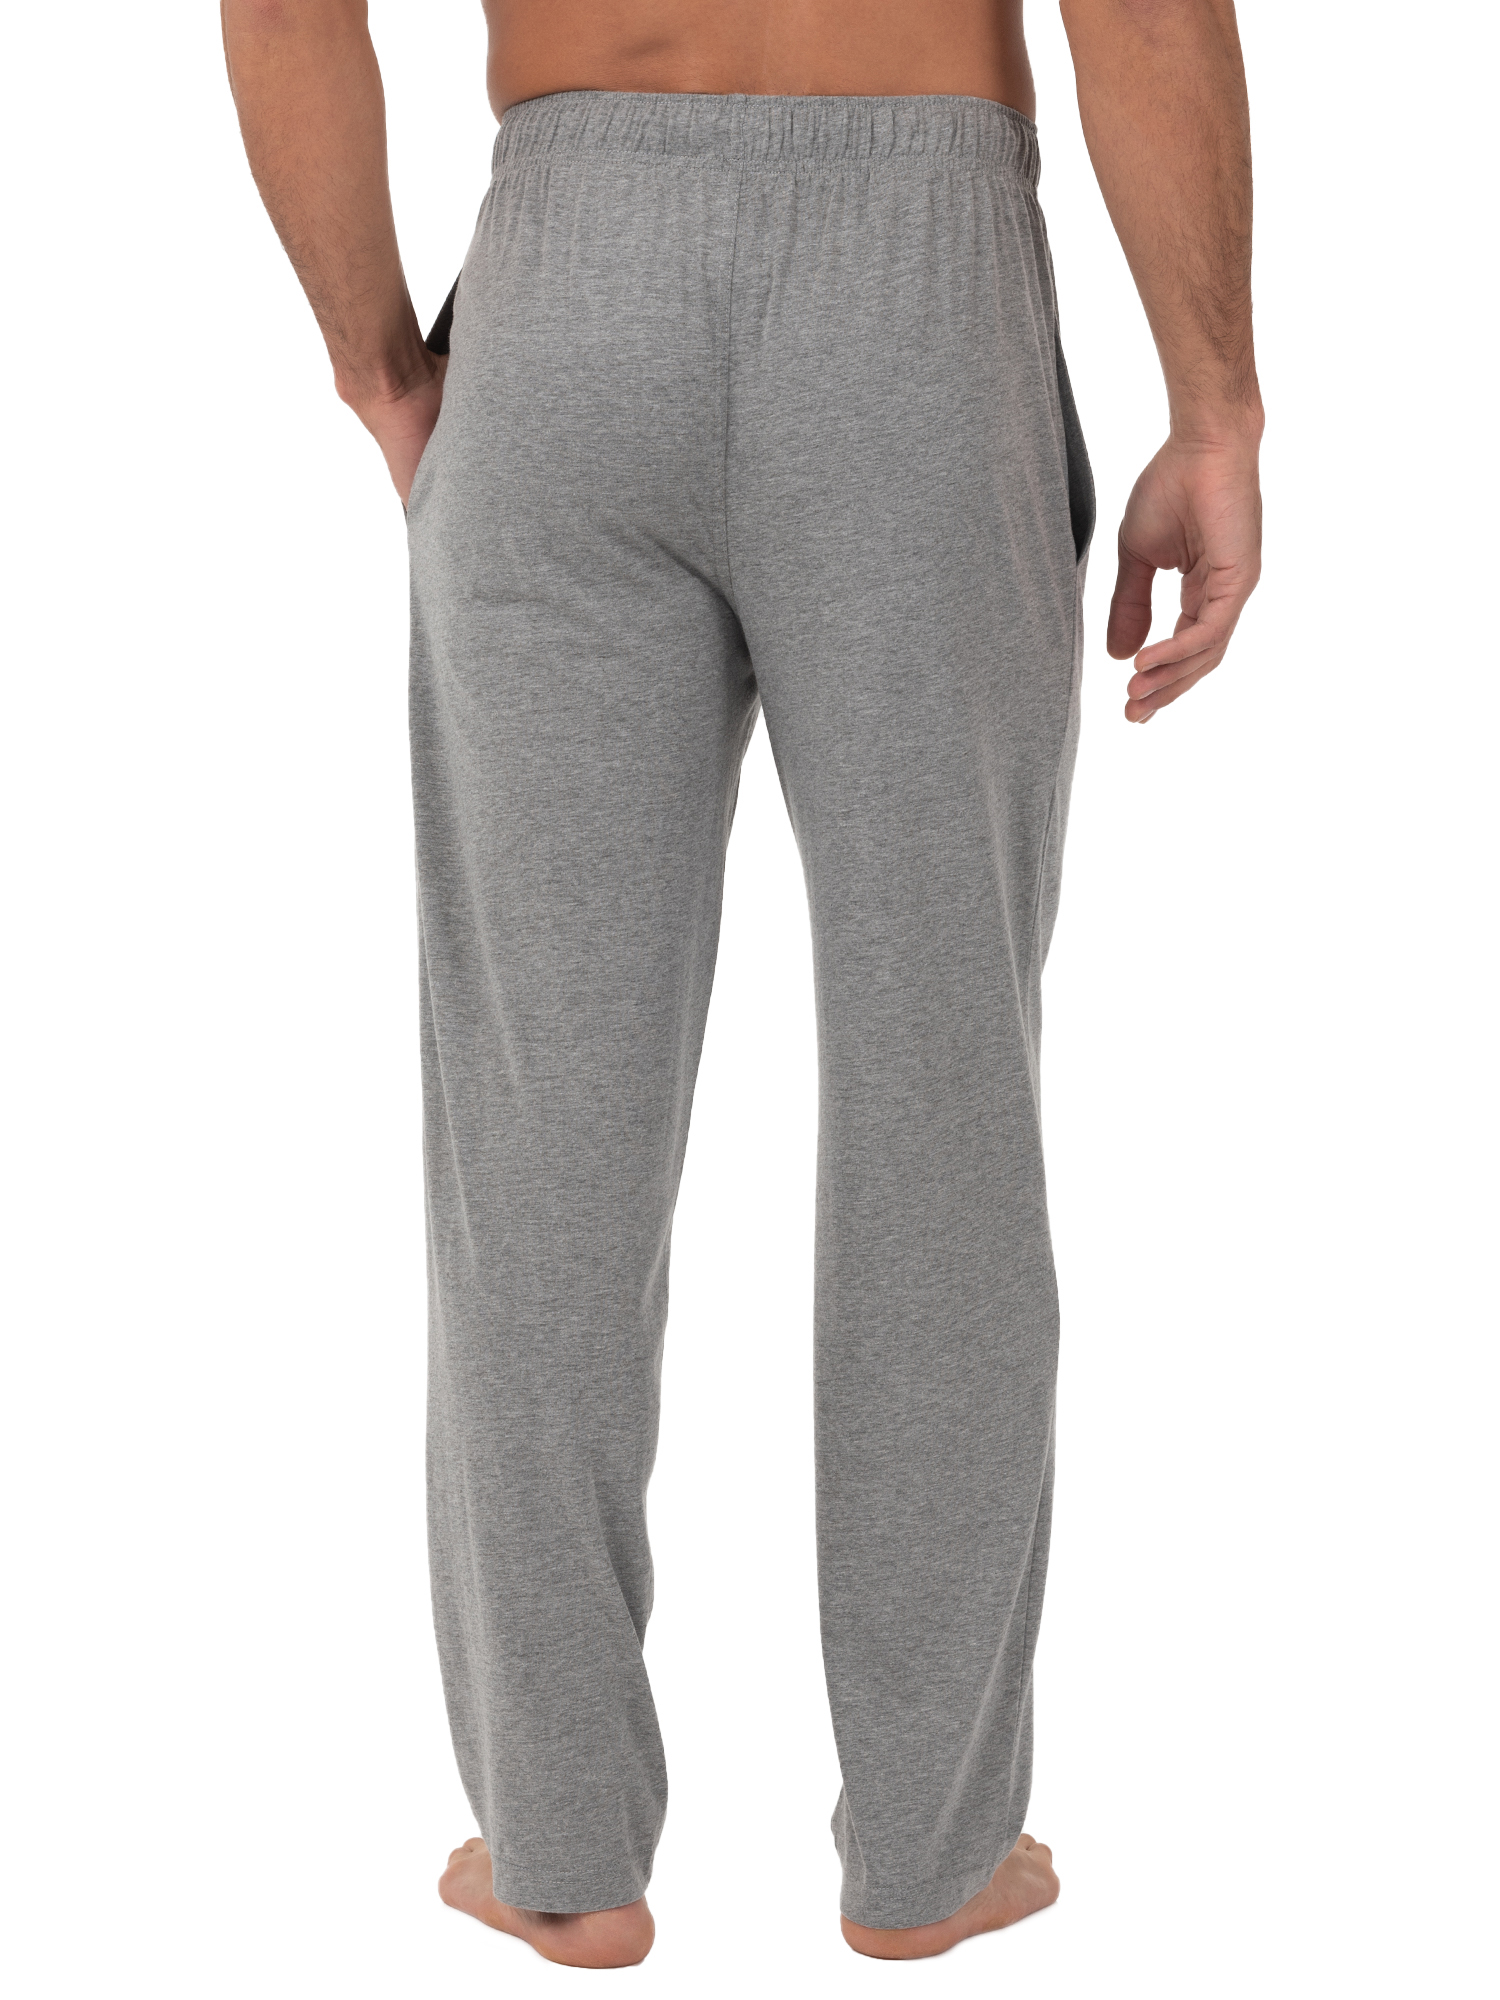 Fruit of the Loom Men's and Big Men's Jersey Knit Pajama Pants, Sizes S ...